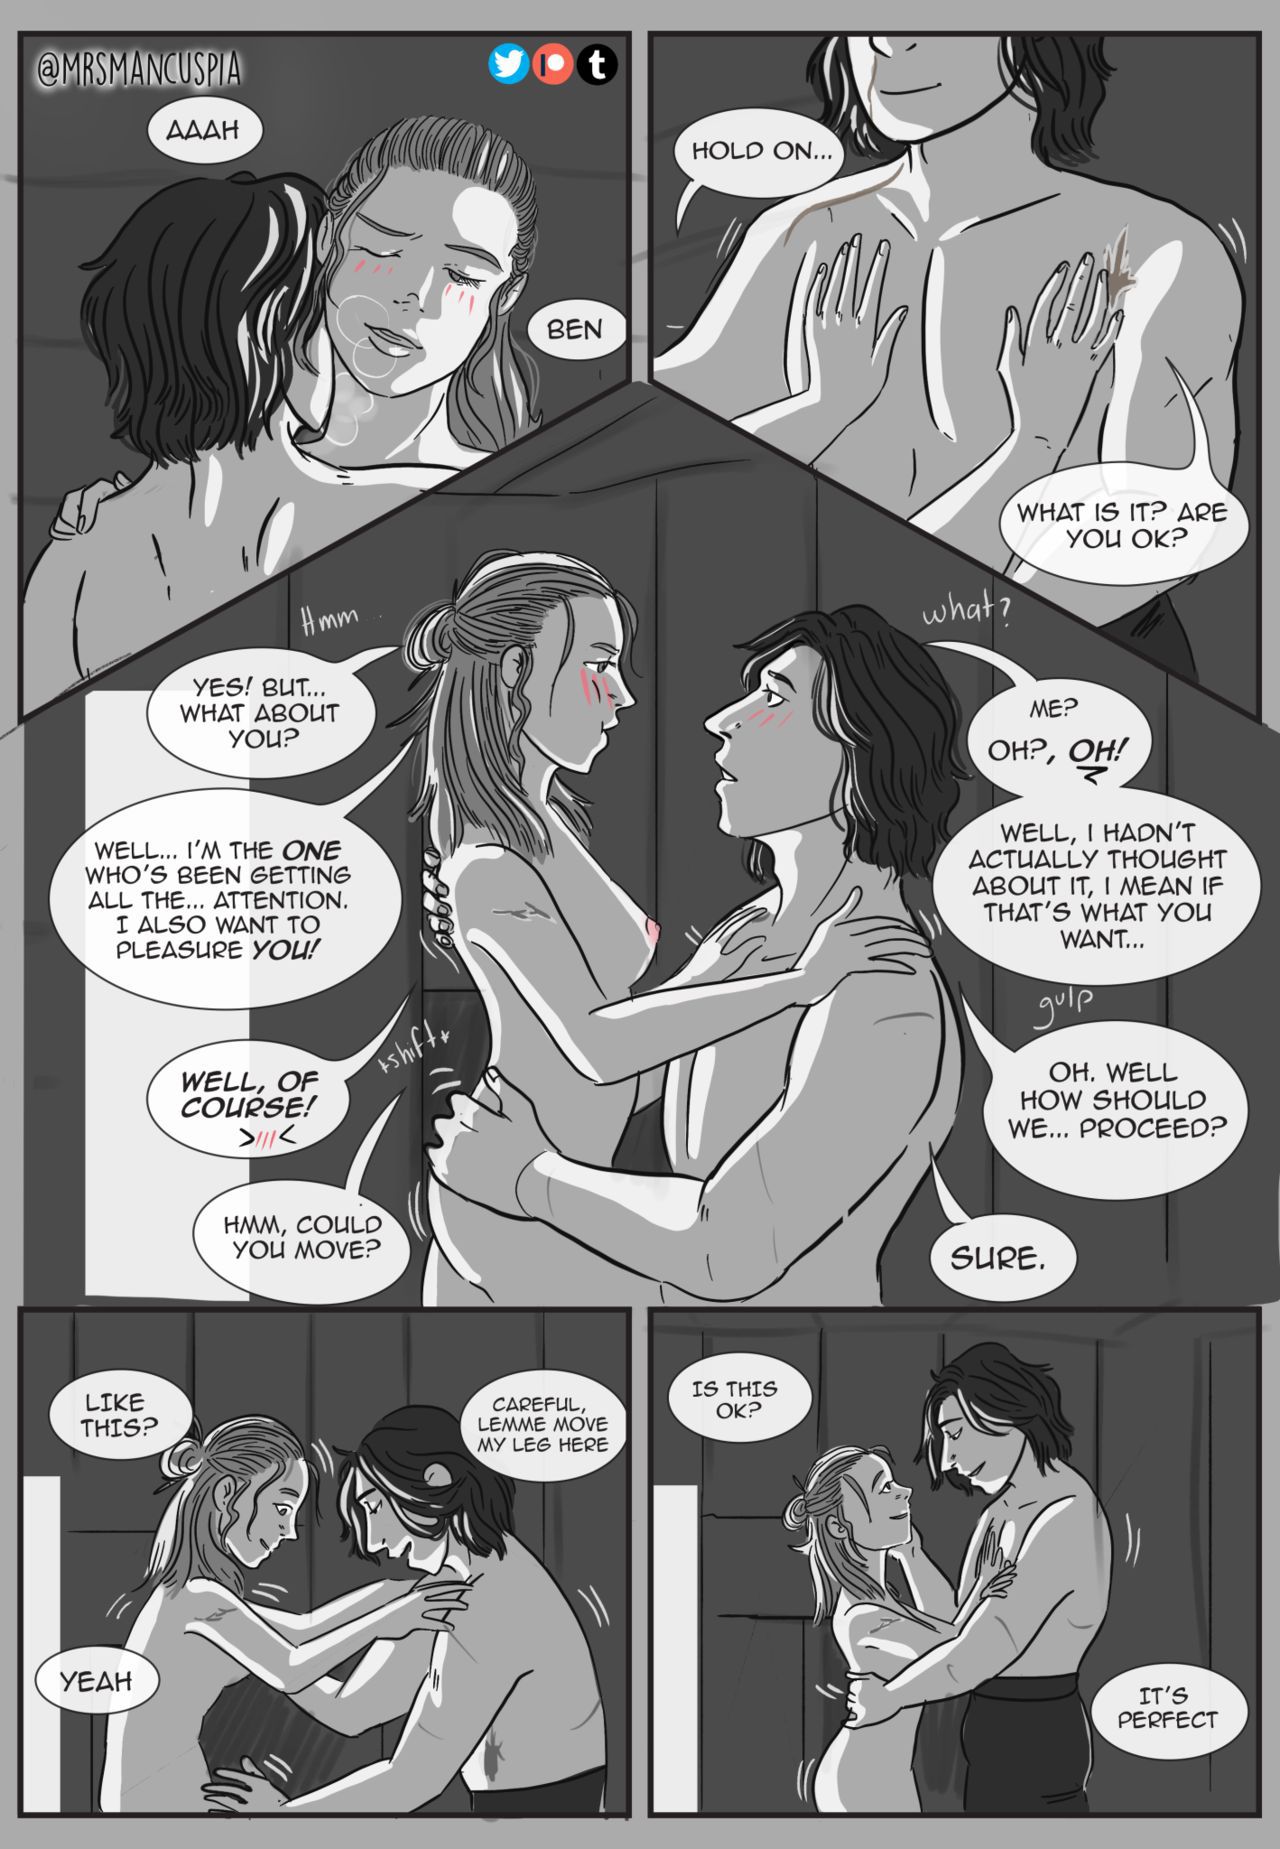 [Mrs Mancuspia] Bedroom Learning (Star Wars) [Ongoing] 33